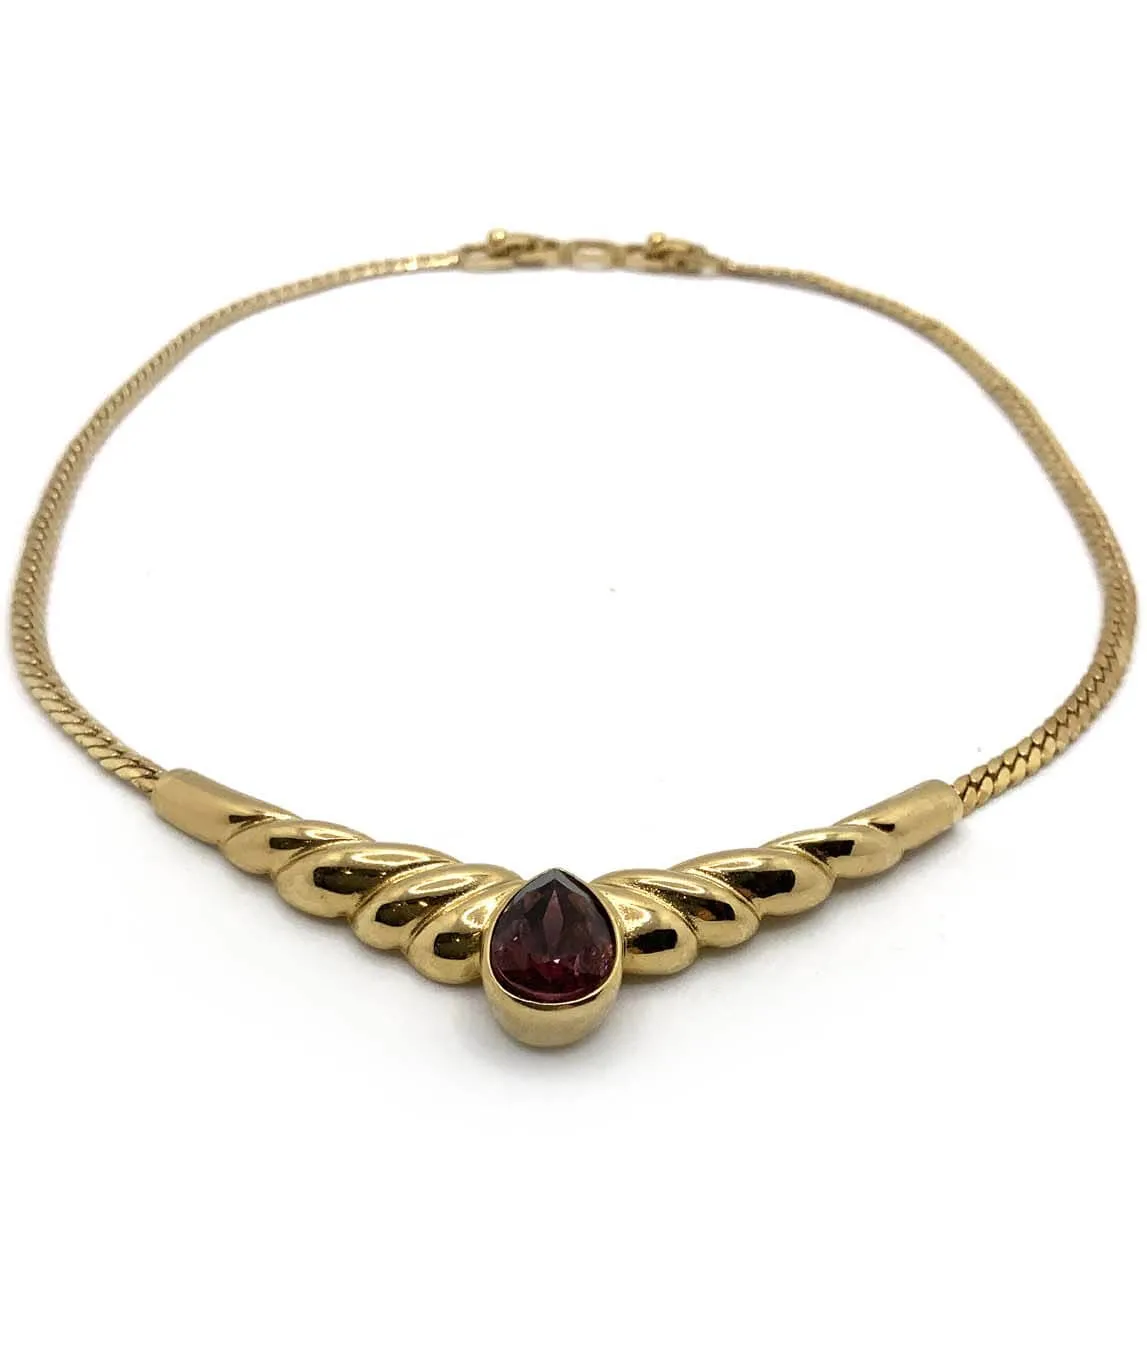 Purple and gold vintage Christian Dior choker necklace